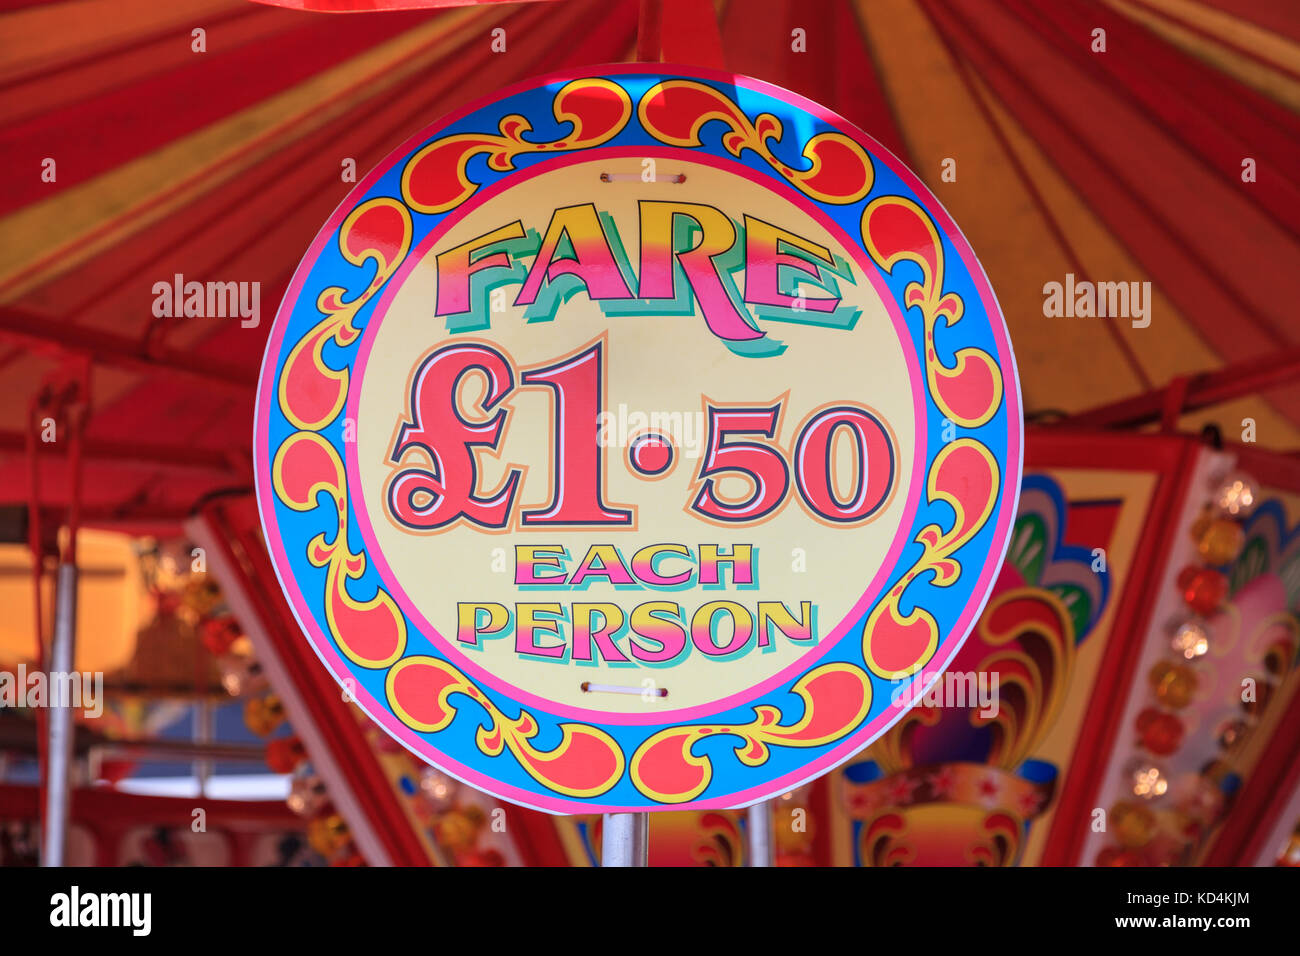 Old fashioned traditional fairground ride price fare sign, England Stock Photo